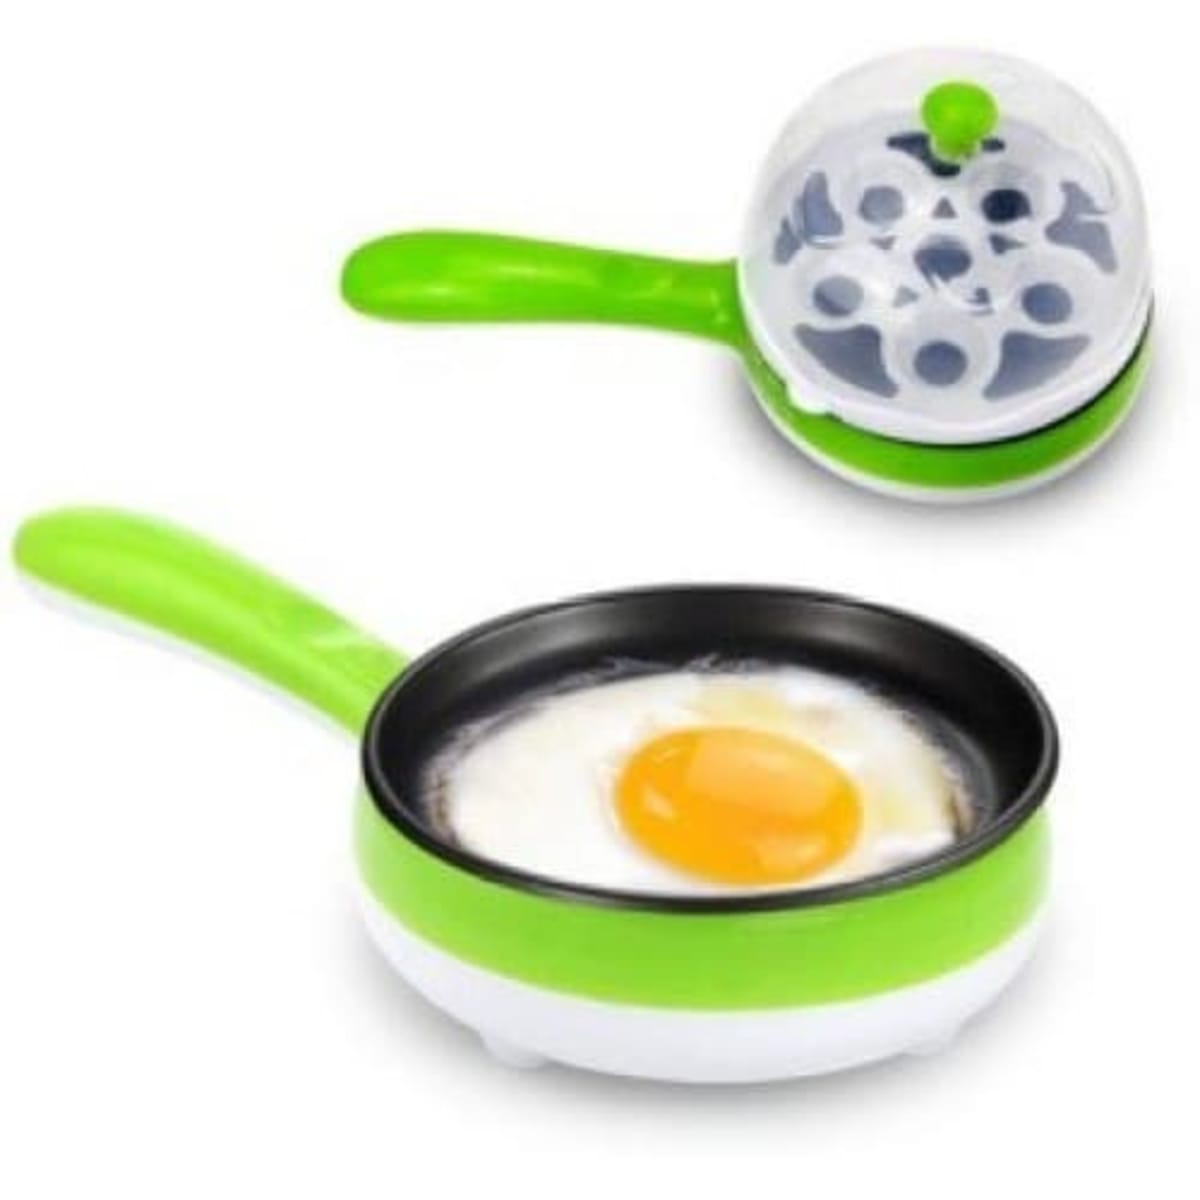 Non-stick Electric Egg Boiler - Steamer And Fryer